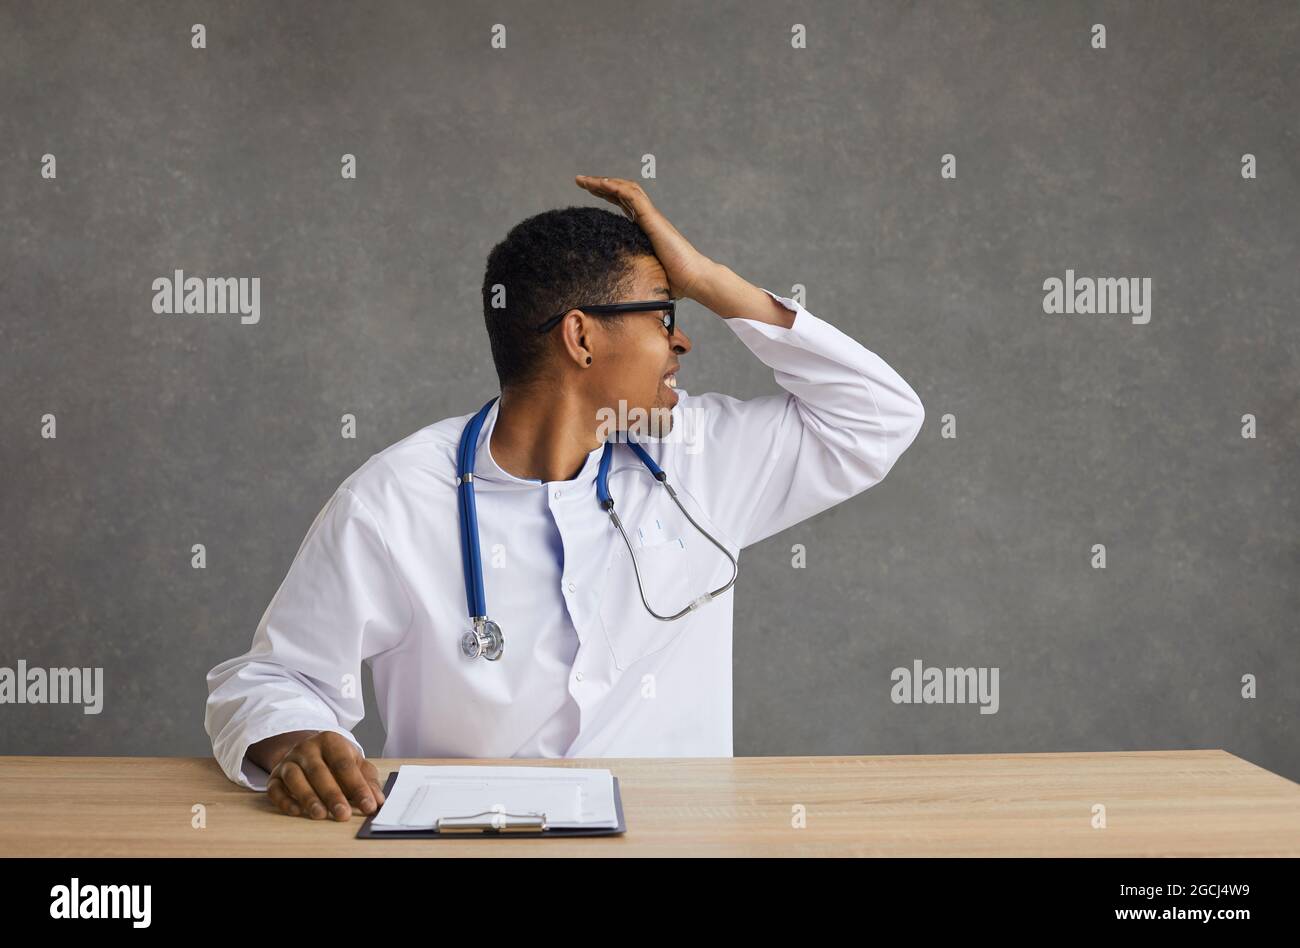 Worried frustrated doctor sitting at desk with hand on head studio shot Stock Photo